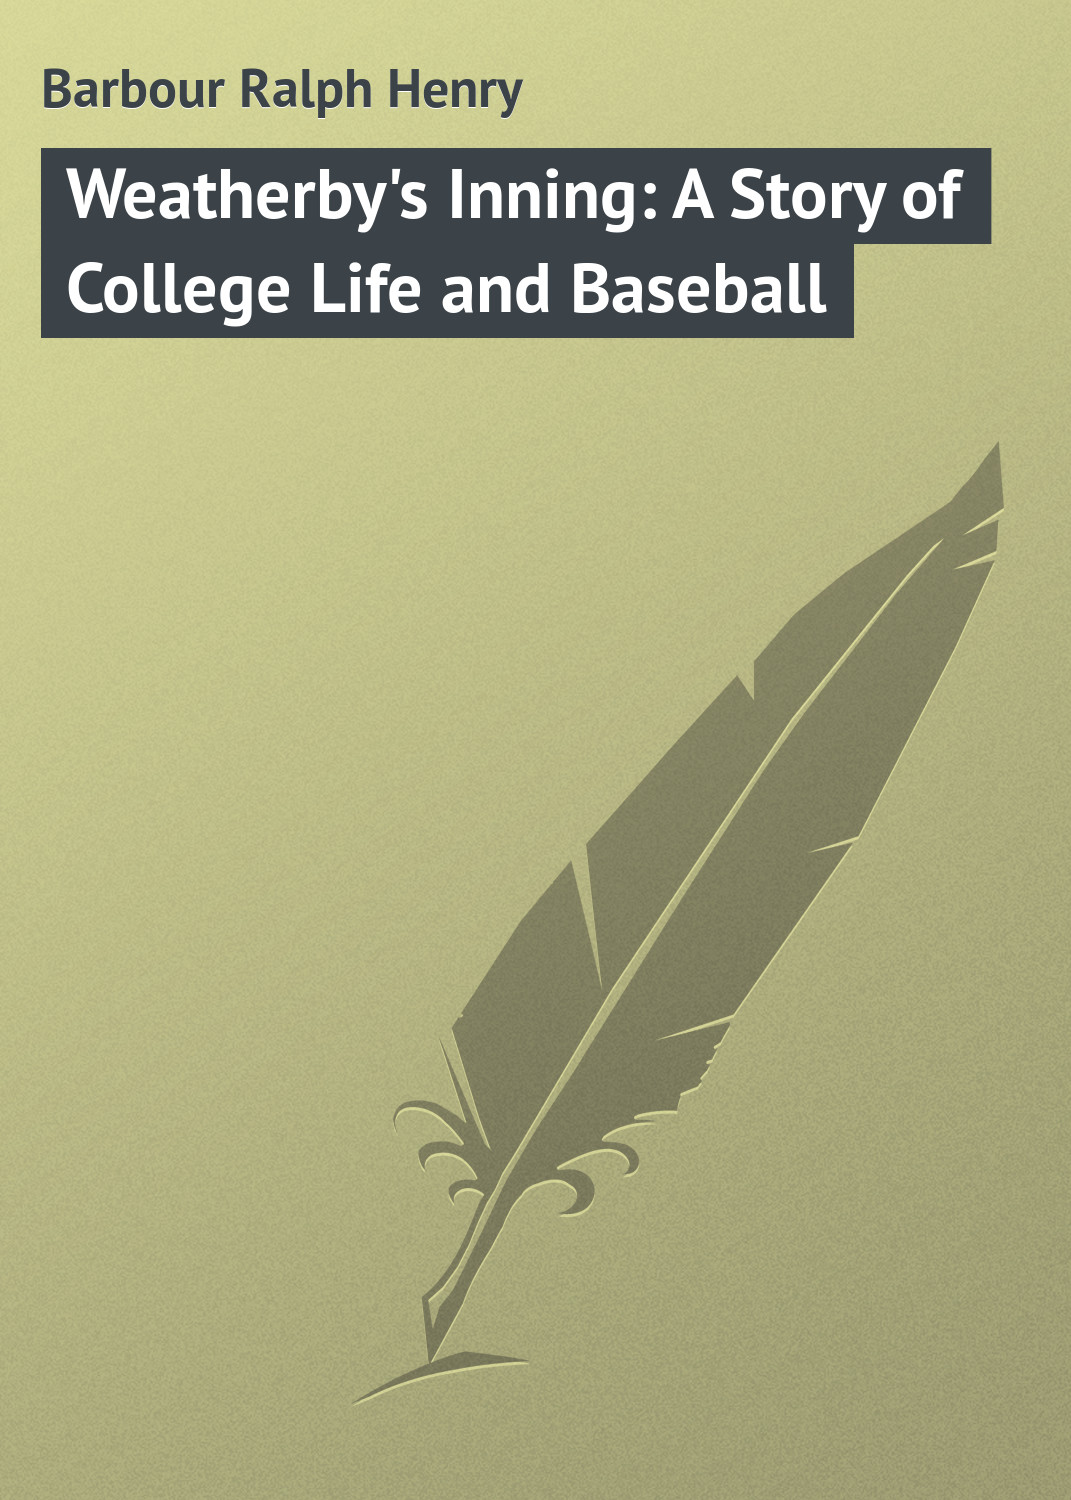 Barbour Ralph Henry Weatherby's Inning: A Story of College Life and Baseball